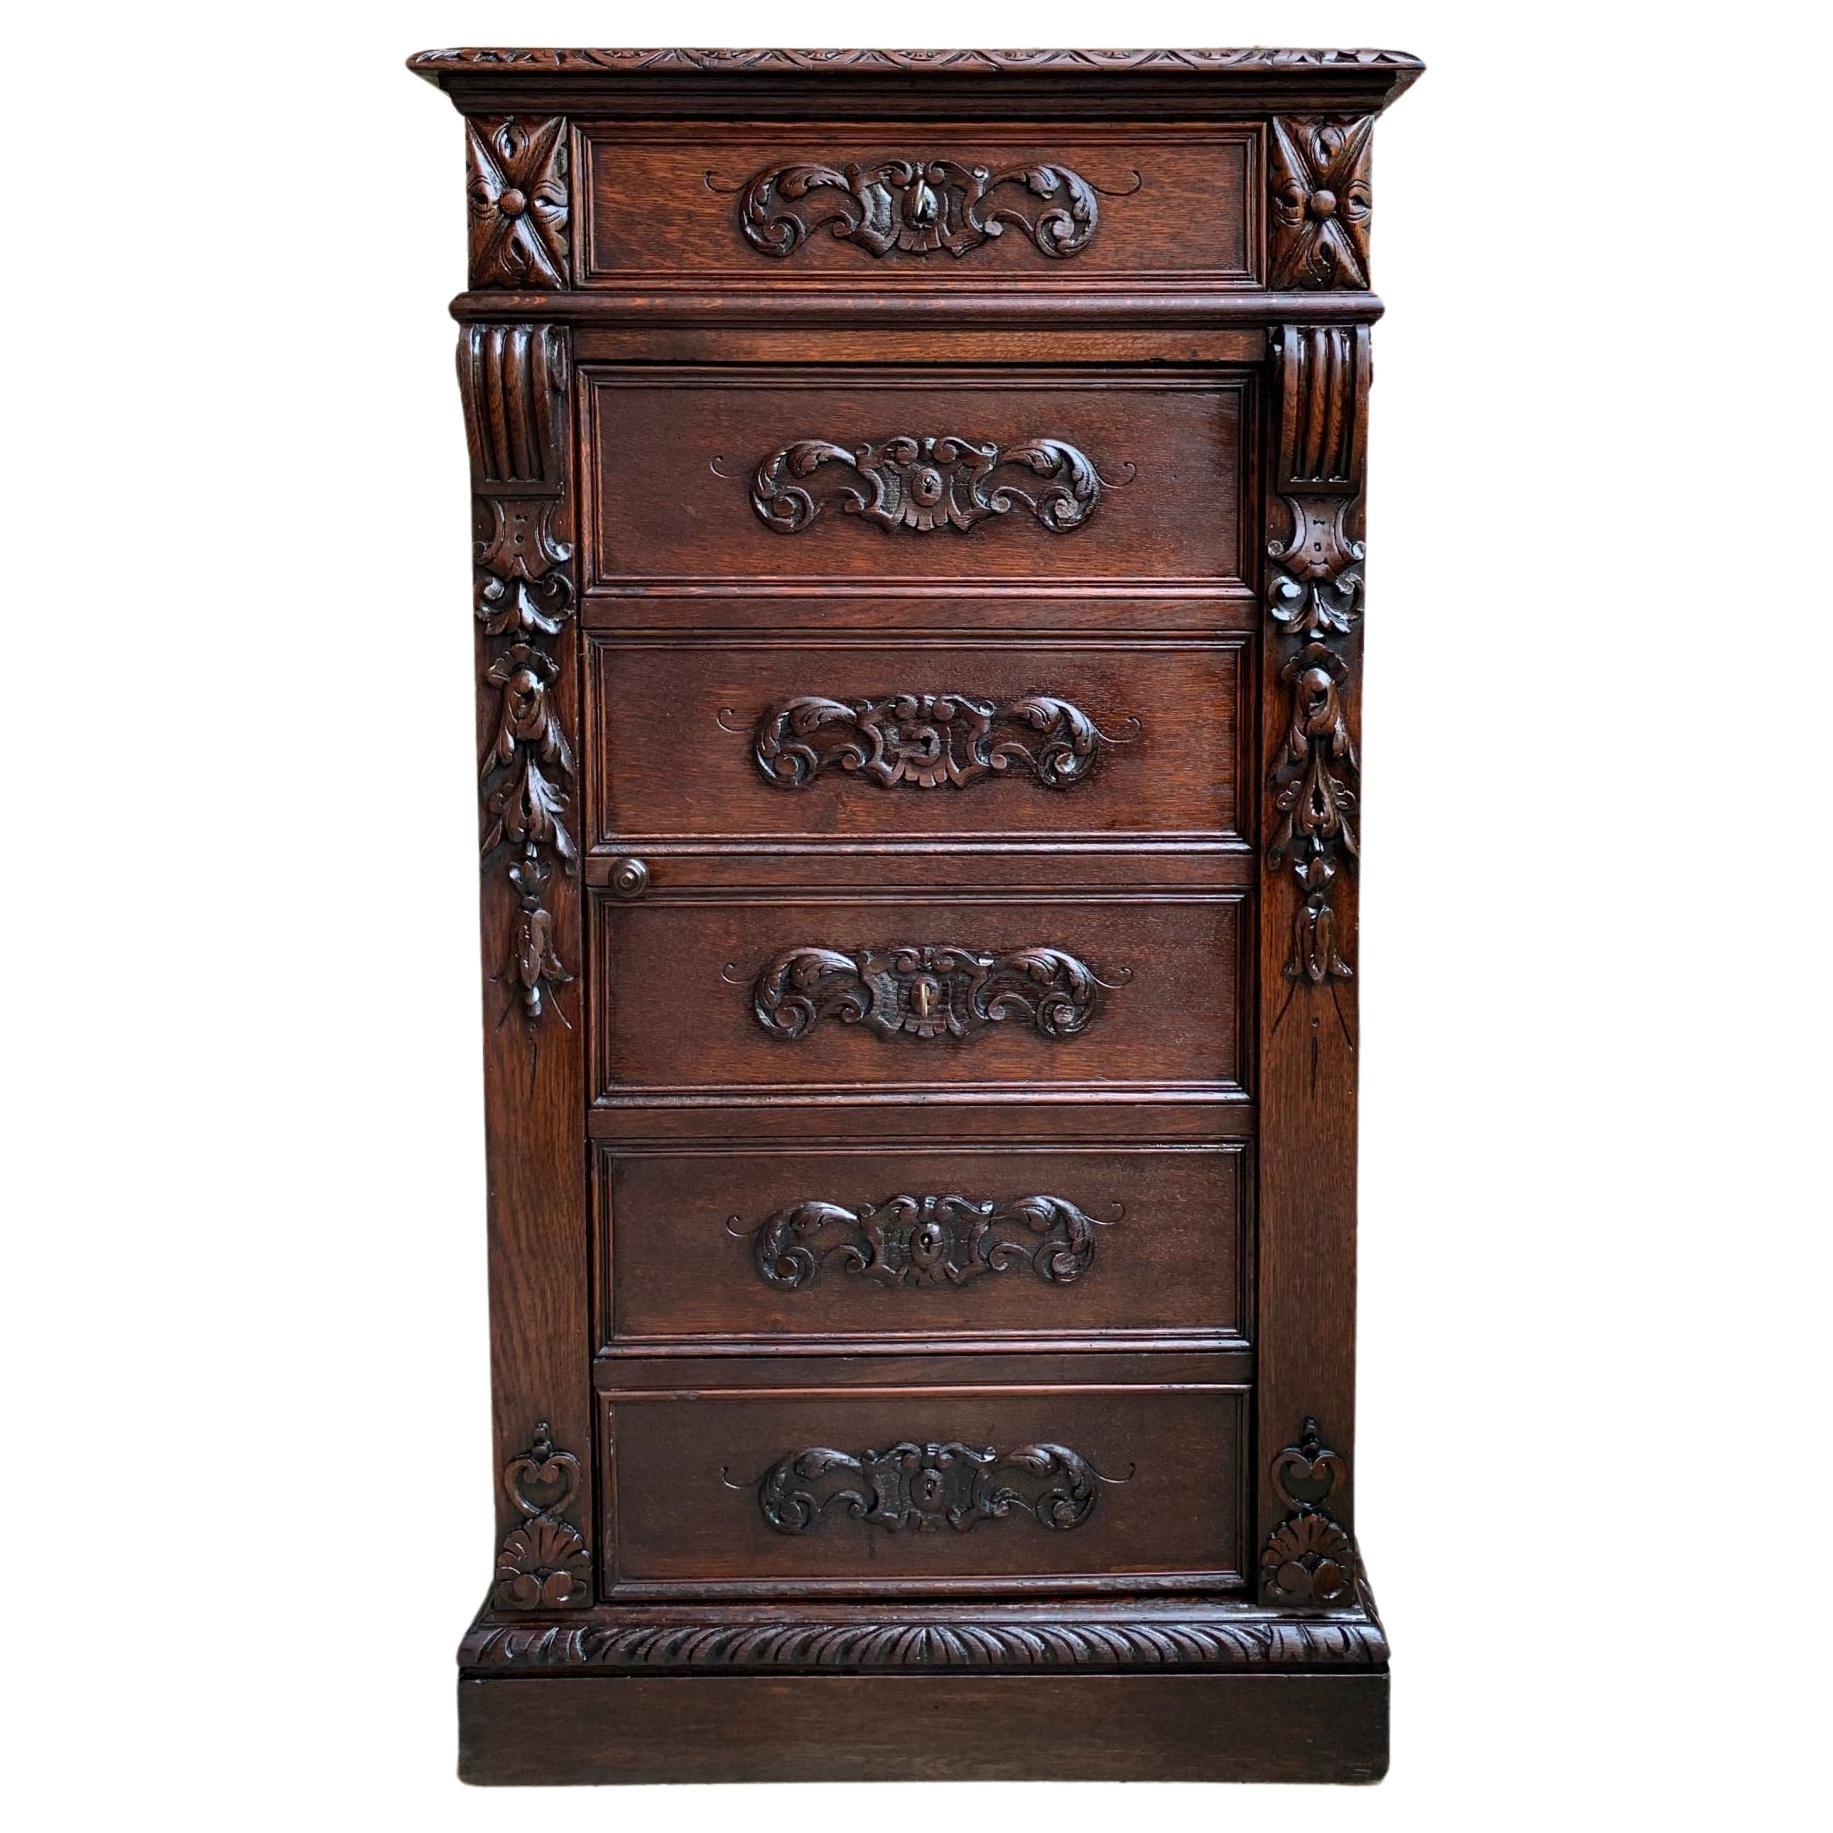 19th century French  Tall Cabinet Faux Chest of Drawers Louis XIV Carved Oak